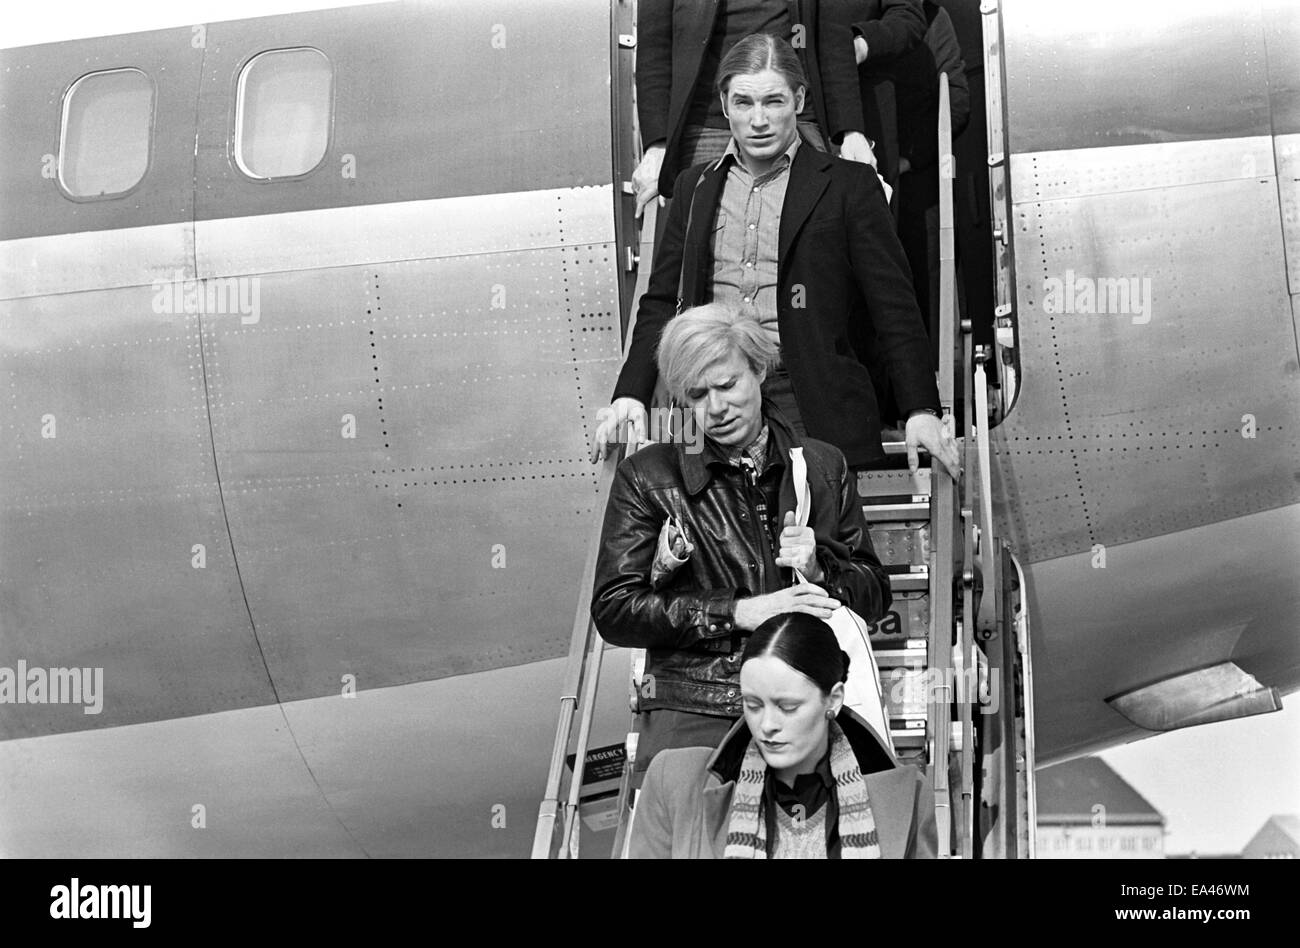 (File) Andy Warhol (middle), Jane Forth and Joe Dallesandro arrive for the premiere of Warhol's latest film 'Trash' in Munich on 17.02.1971. Stock Photo